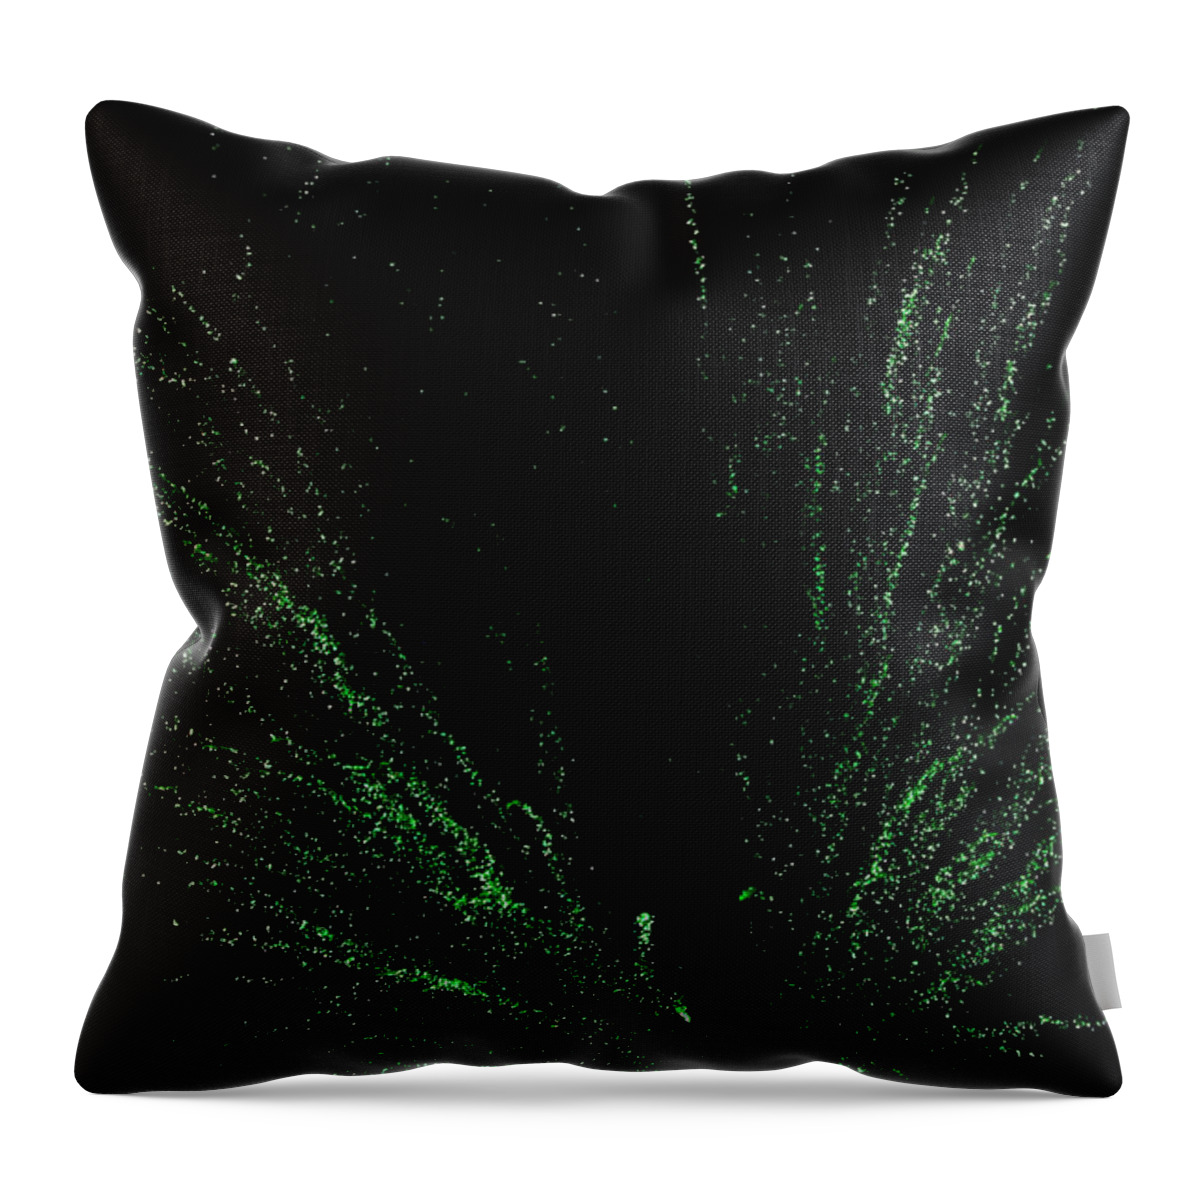 Fireworks Throw Pillow featuring the photograph Fireworks 4 by Emme Pons